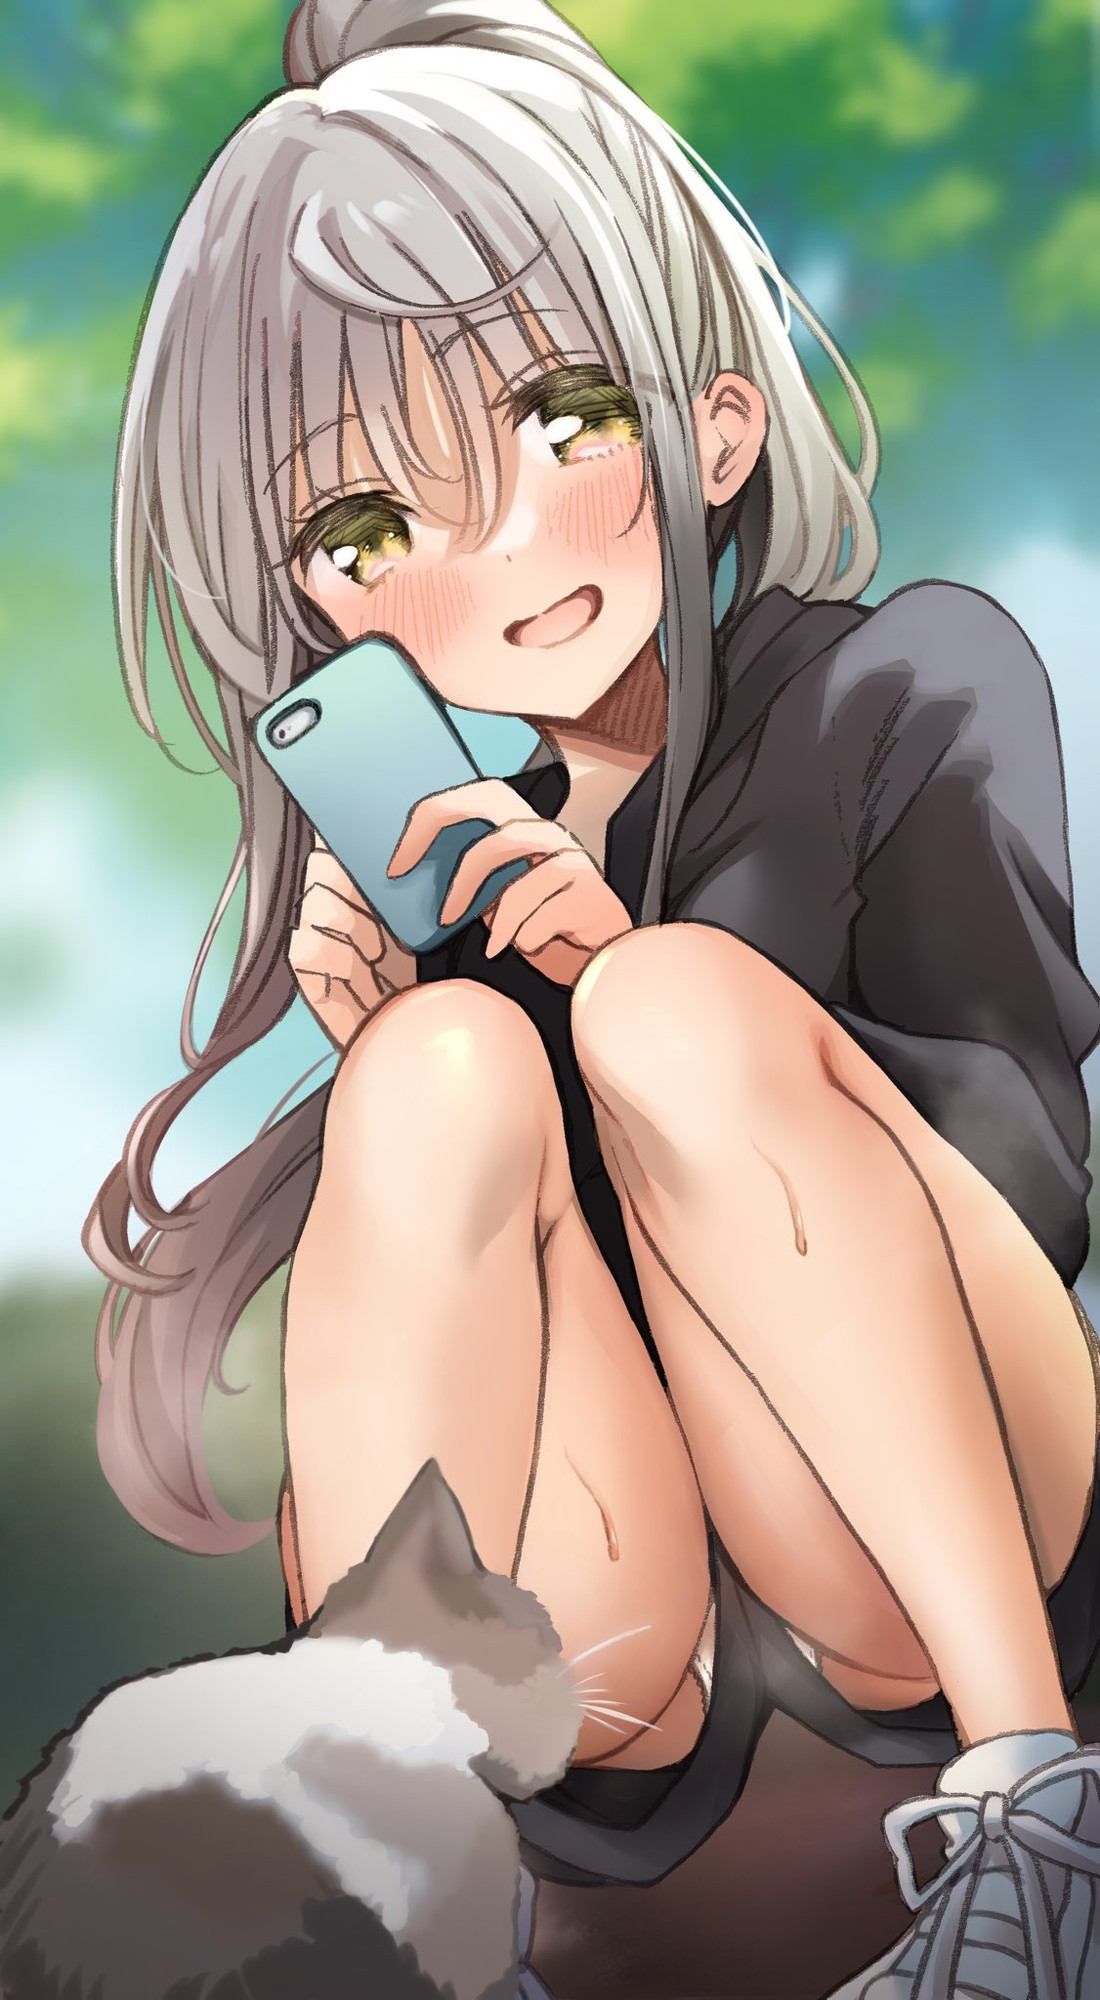 "Where are you looking~?" A soft-looking defenseless crotch image ♪ of a girl squatting with her eyes 20